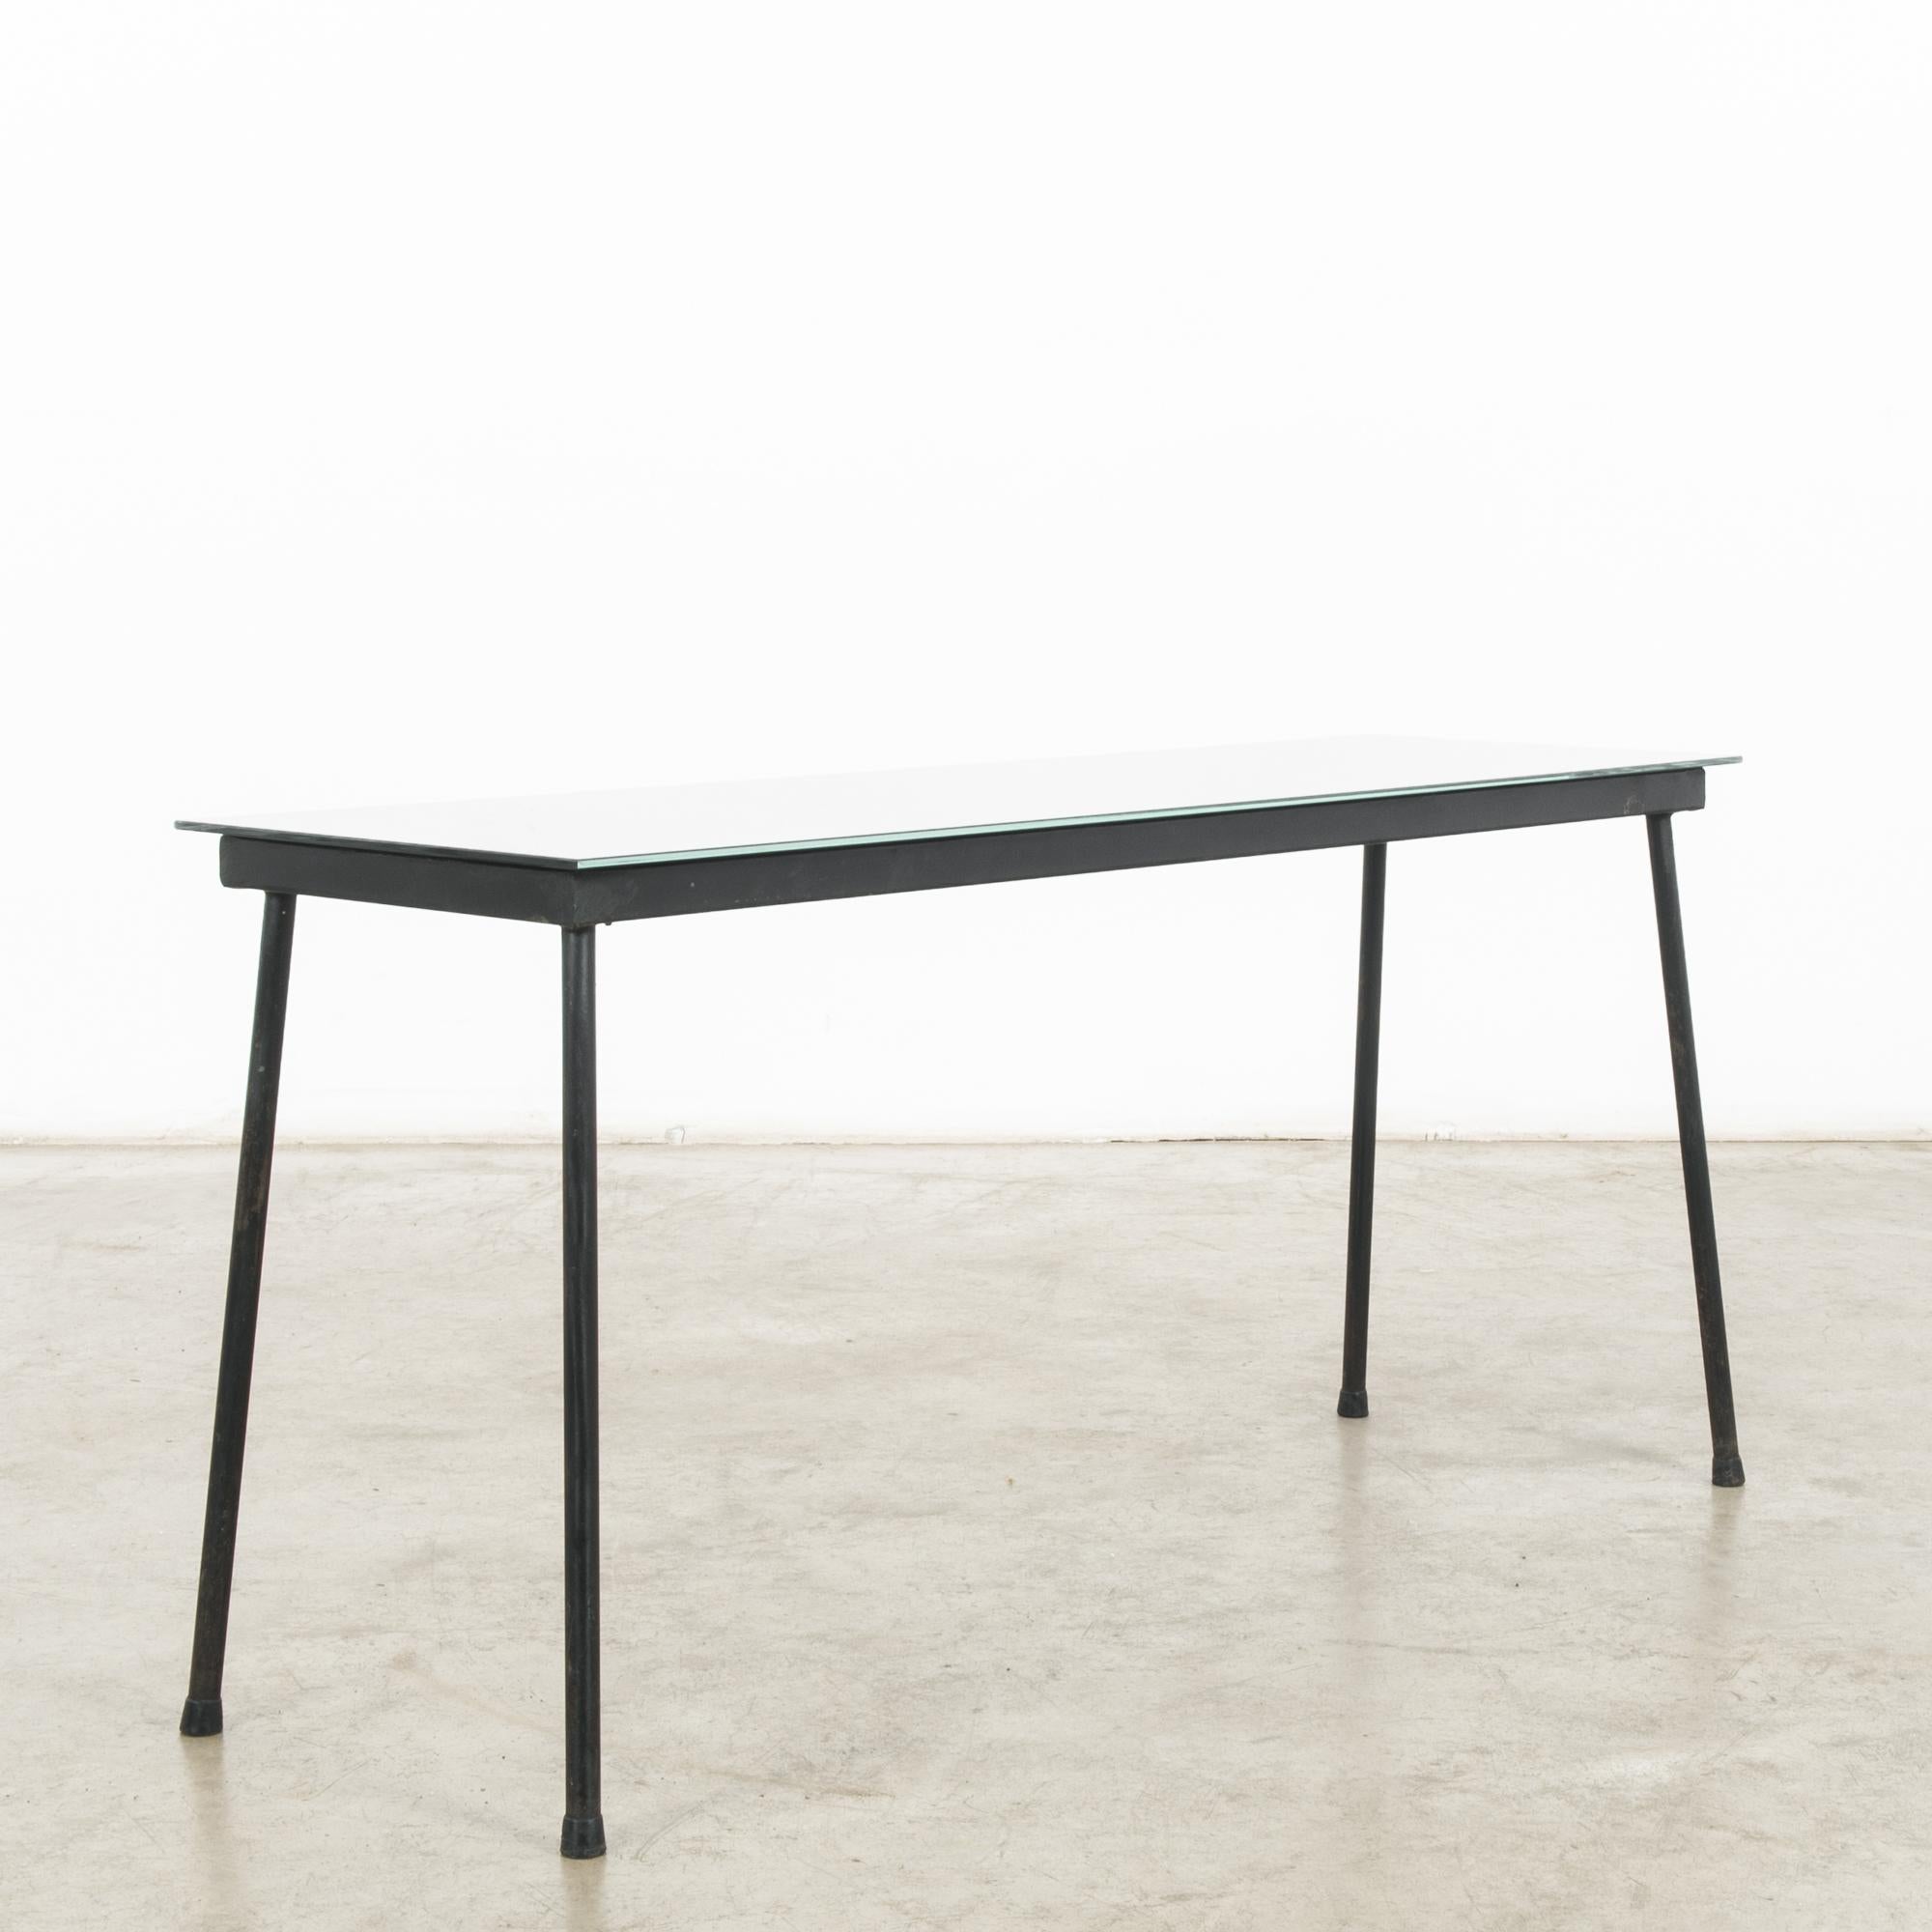 In the vibrant design landscape of 1960s France, this metal coffee table with a glass top epitomizes the sleek sophistication and modernist charm of the era. Crafted with meticulous attention to detail, this piece represents the epitome of French